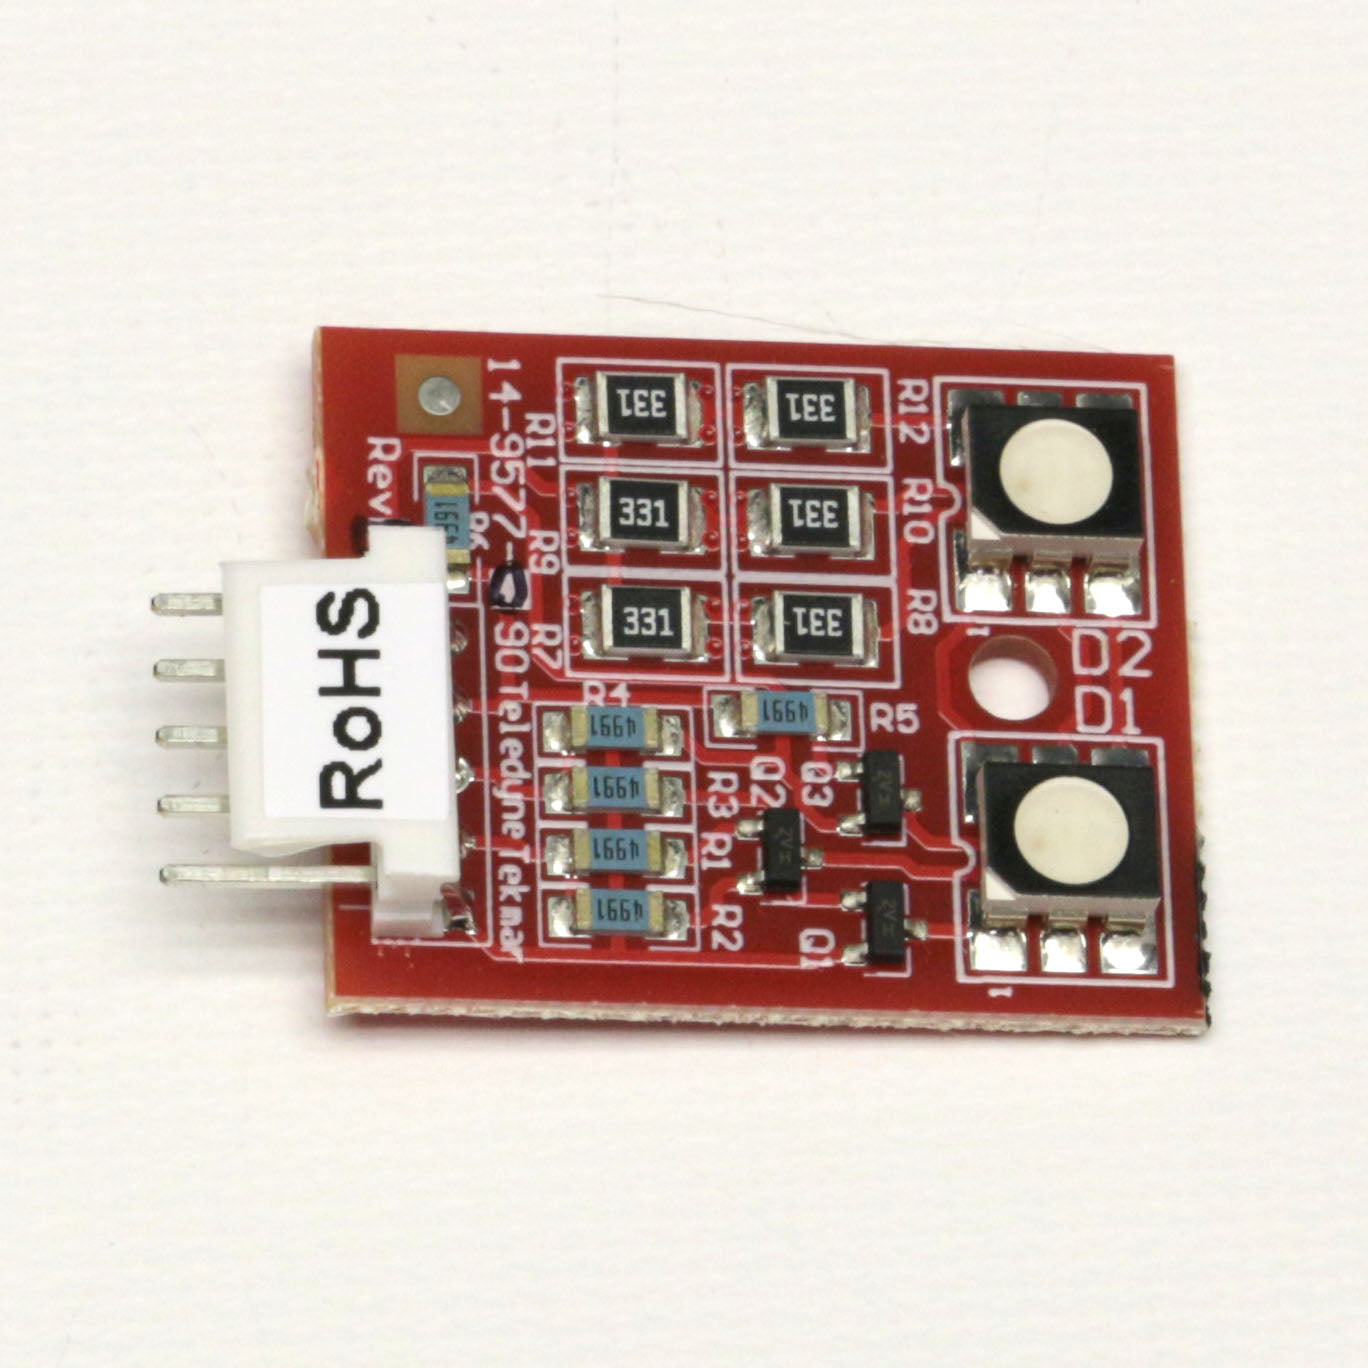 LED Banner Control Board